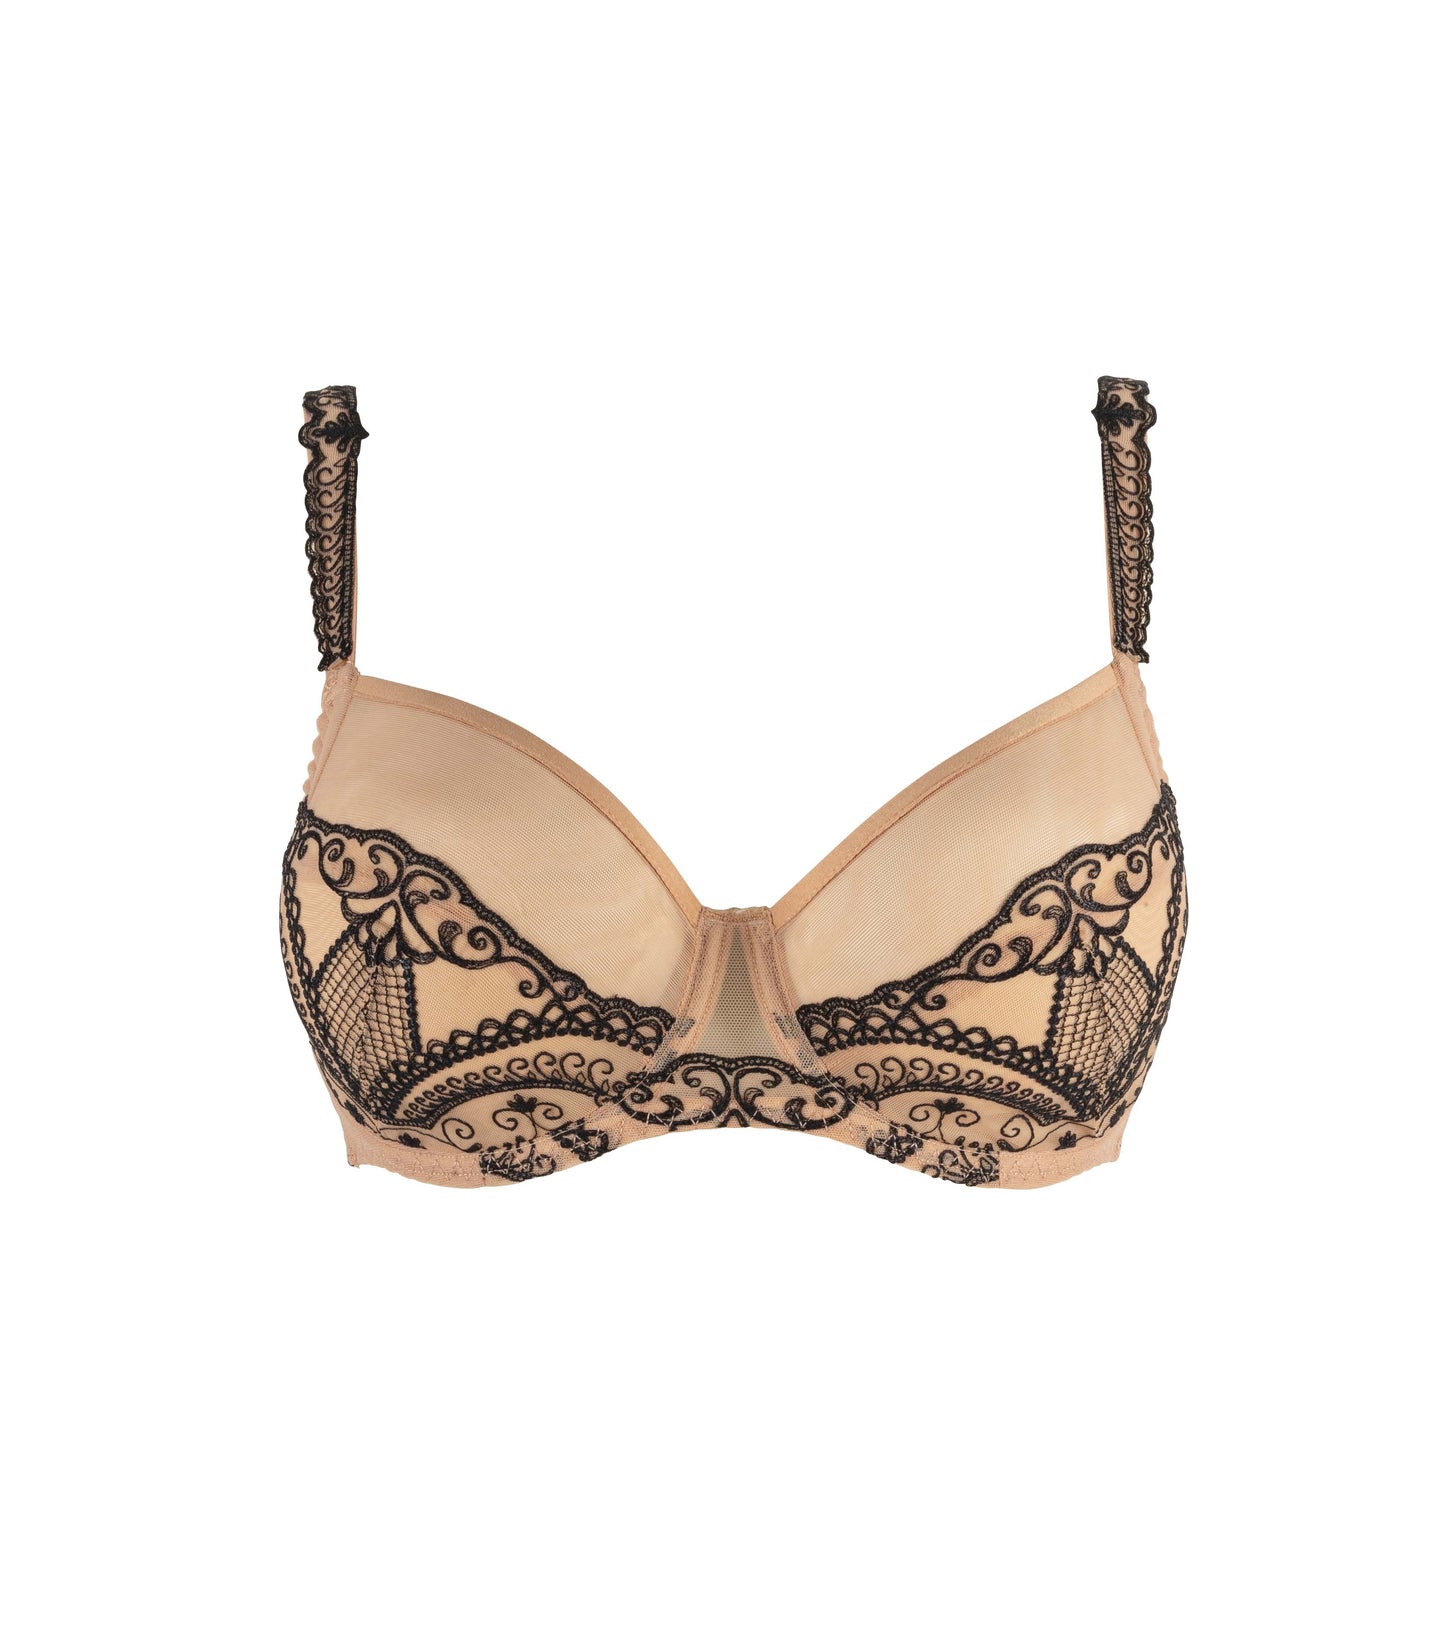 Sophisticated and luxuriously embroidered full cup bra from the Kant line by Louisa Bracq from France at DiModa Lingerie Toronto.